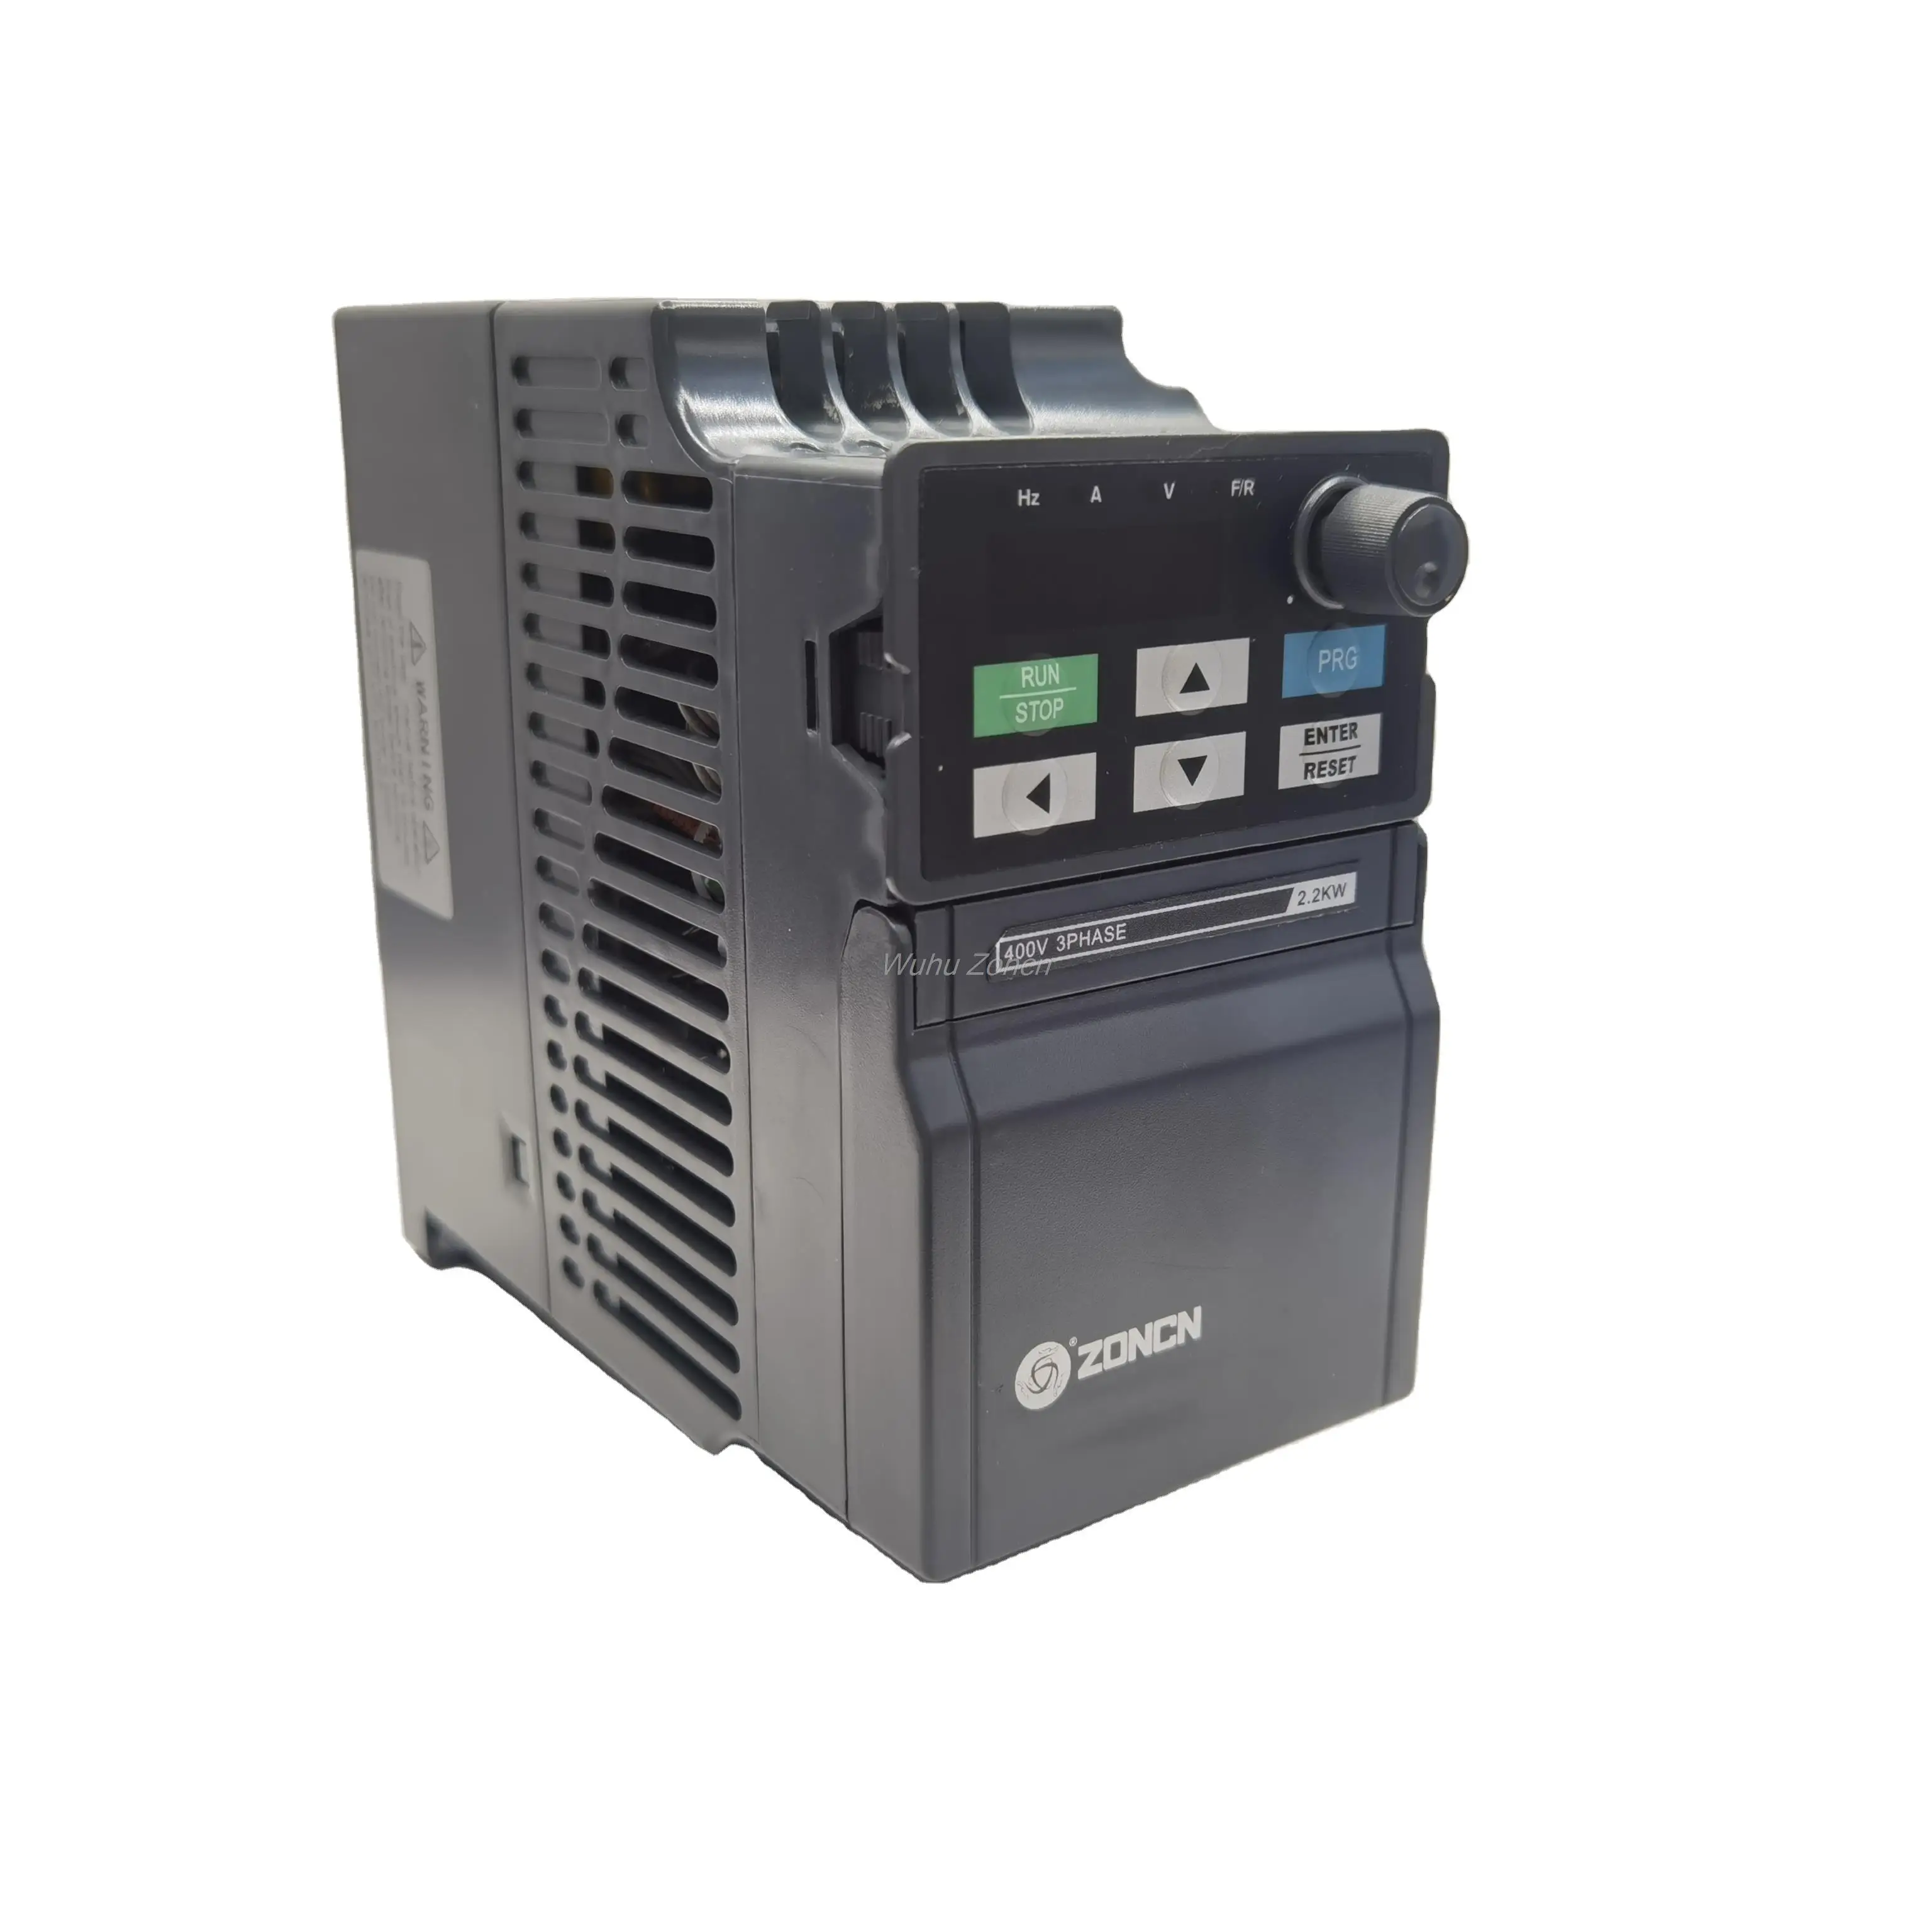 

Zoncn 380V 0.4KW 0.75KW 1.5KW 2.2KW Variable Frequency Drives Inverter / AC Motor / VFD/ 3 Phase Input and 3 PH Output